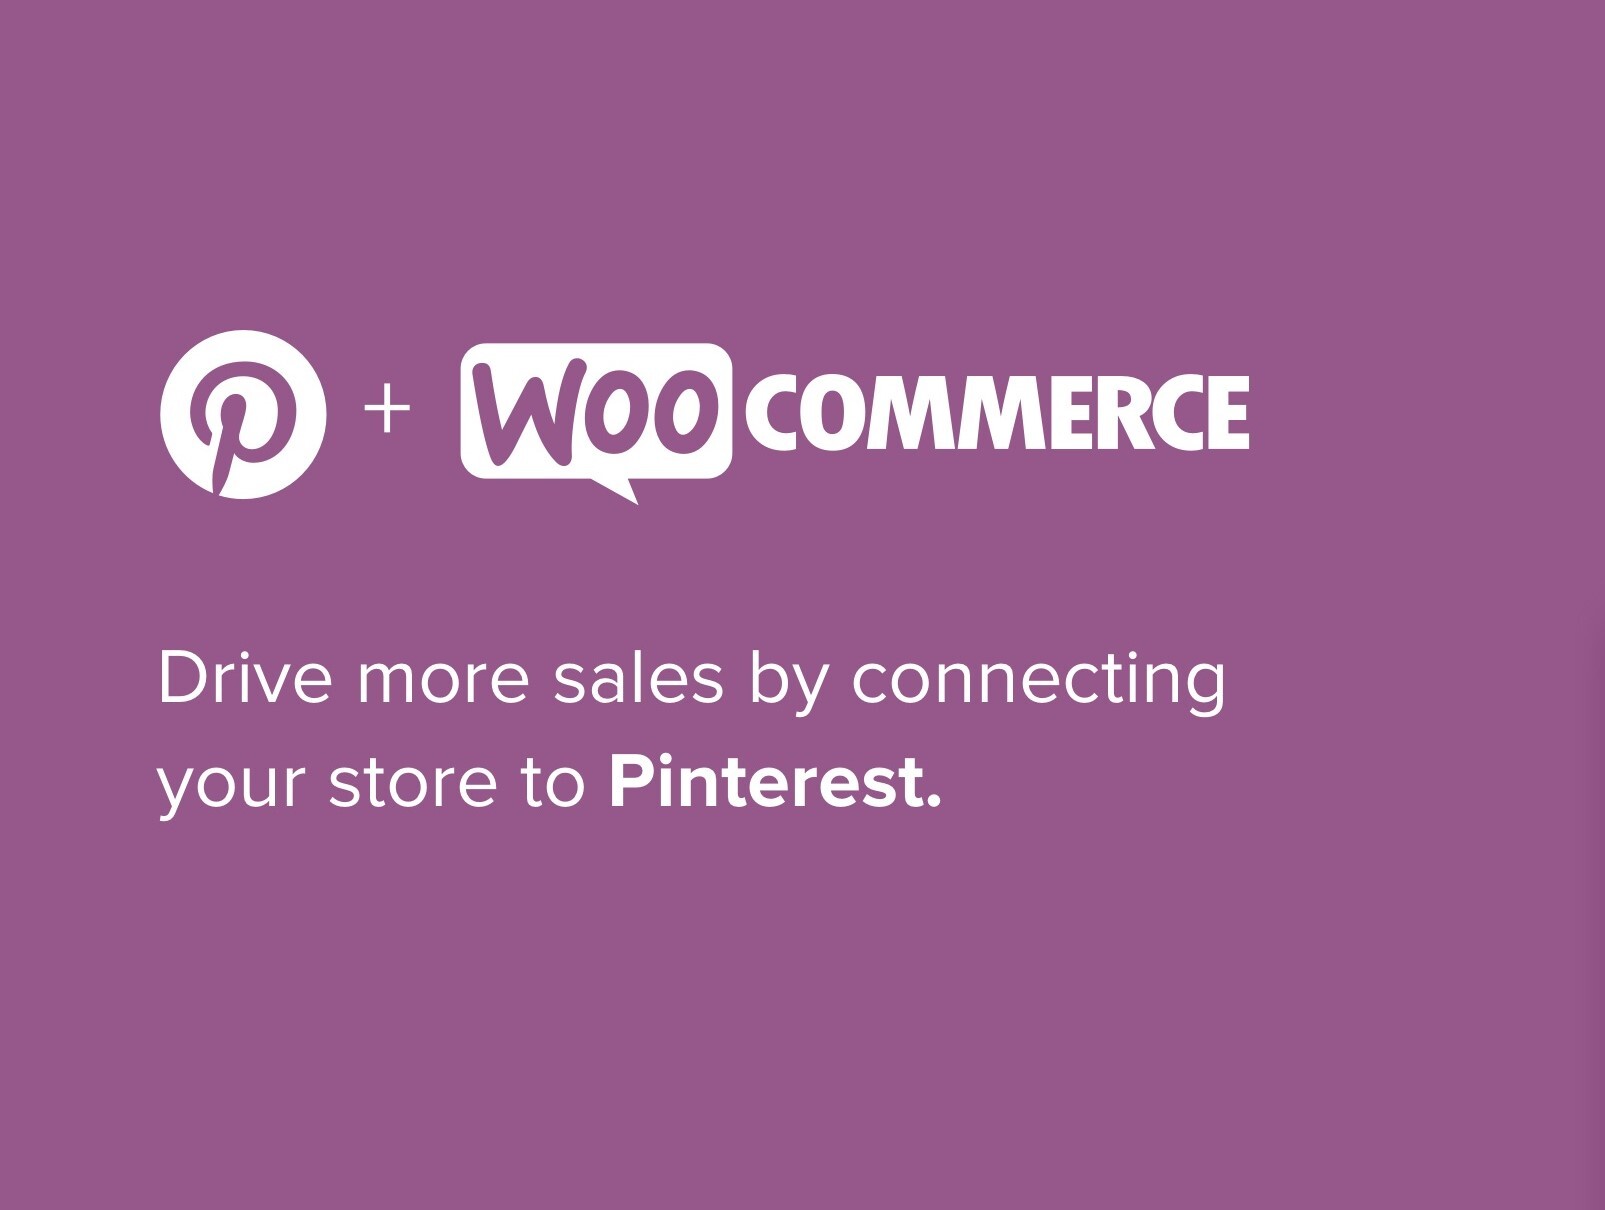 How to Use Pinterest to Drive More Sales to Your WooCommerce Store